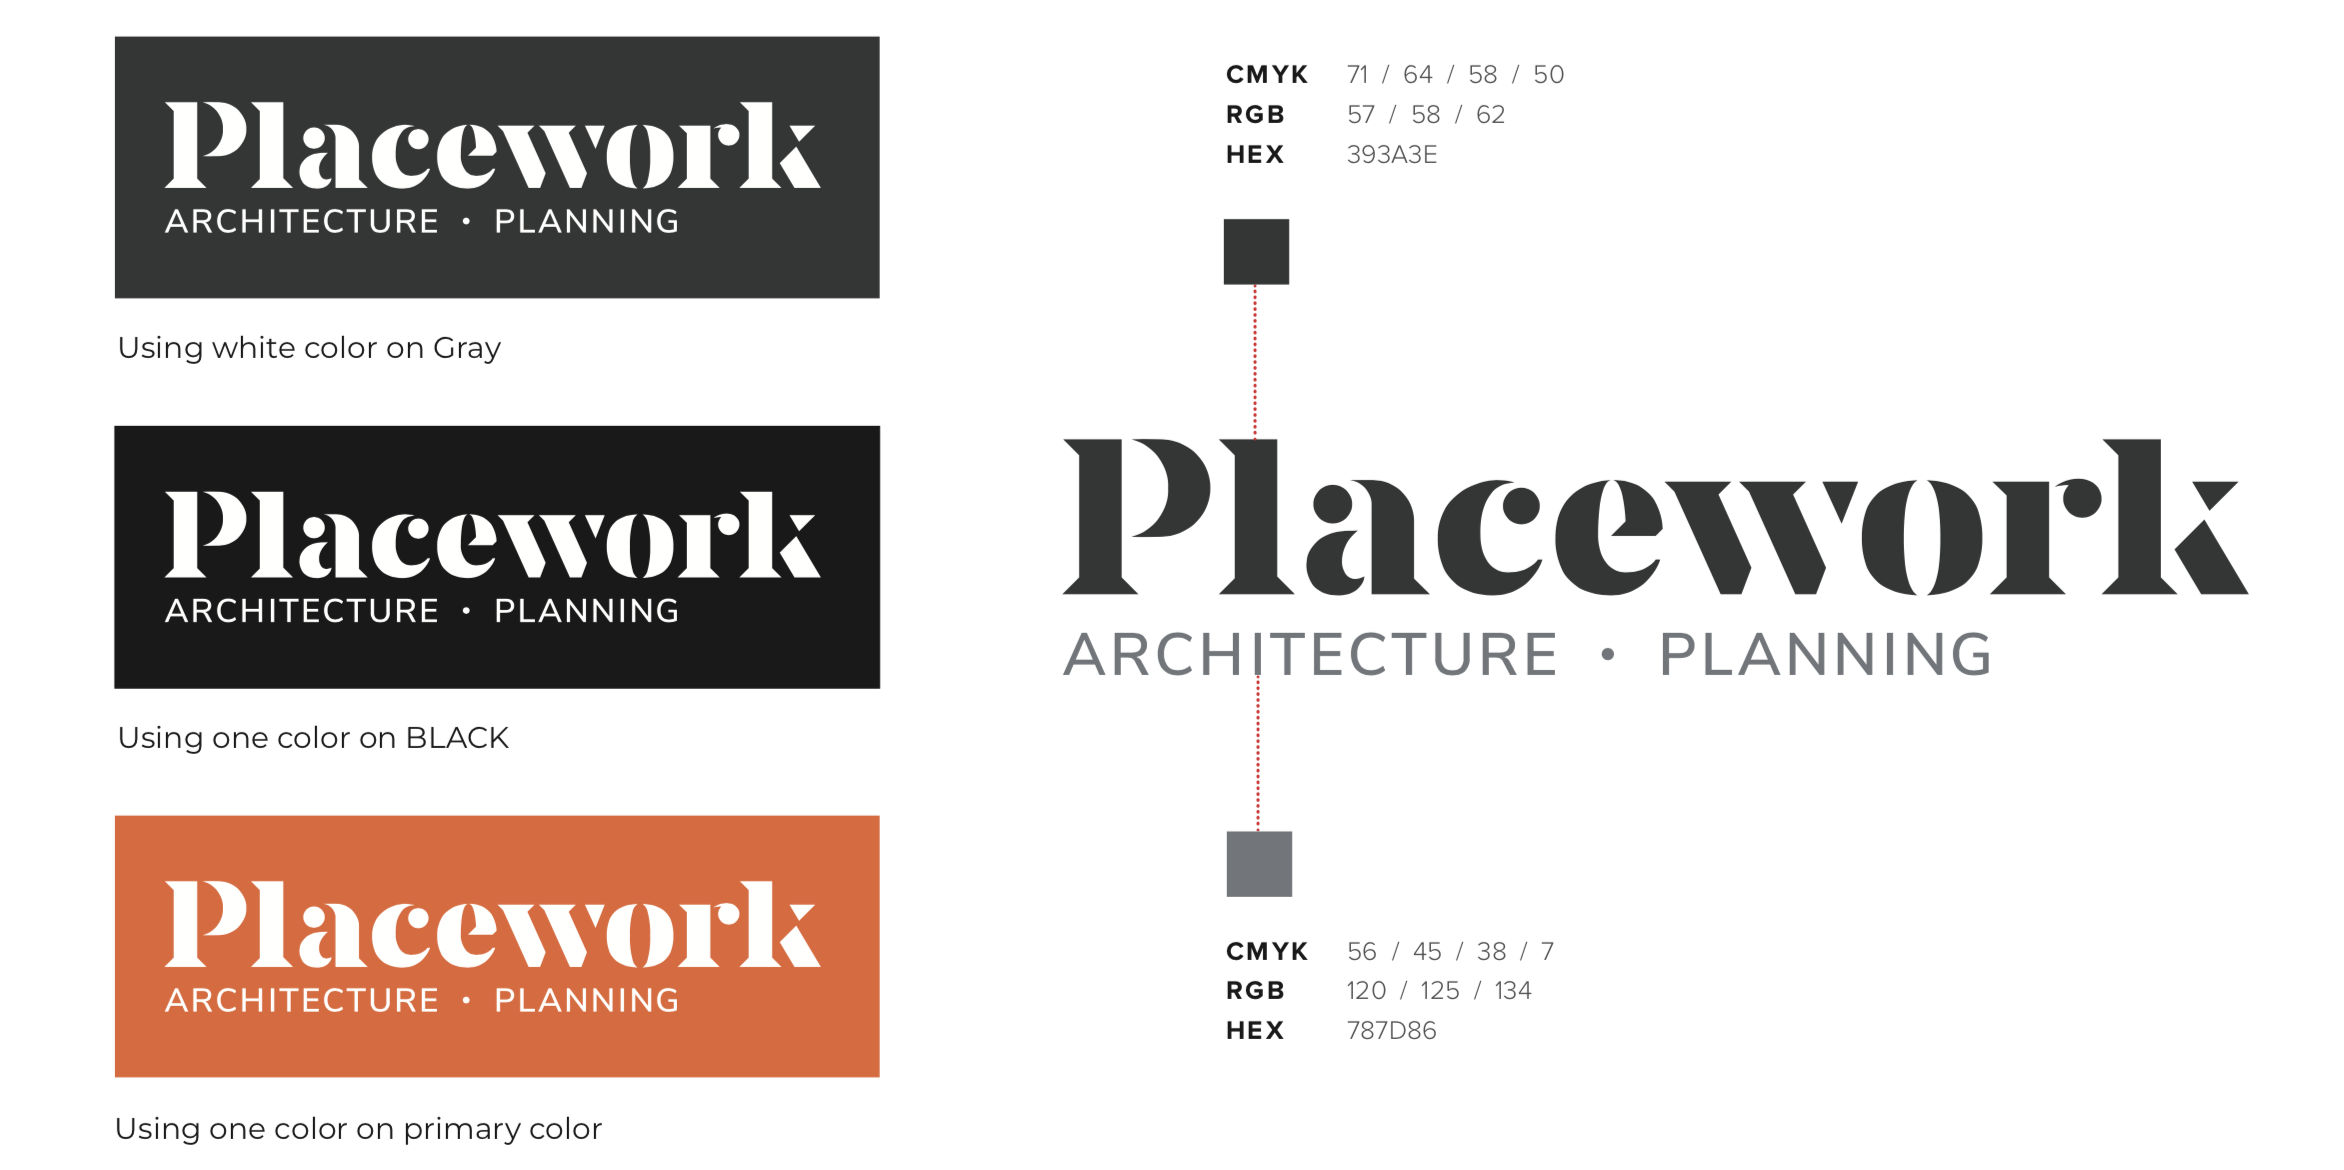 Custom Graphic Design for Architecture Firms